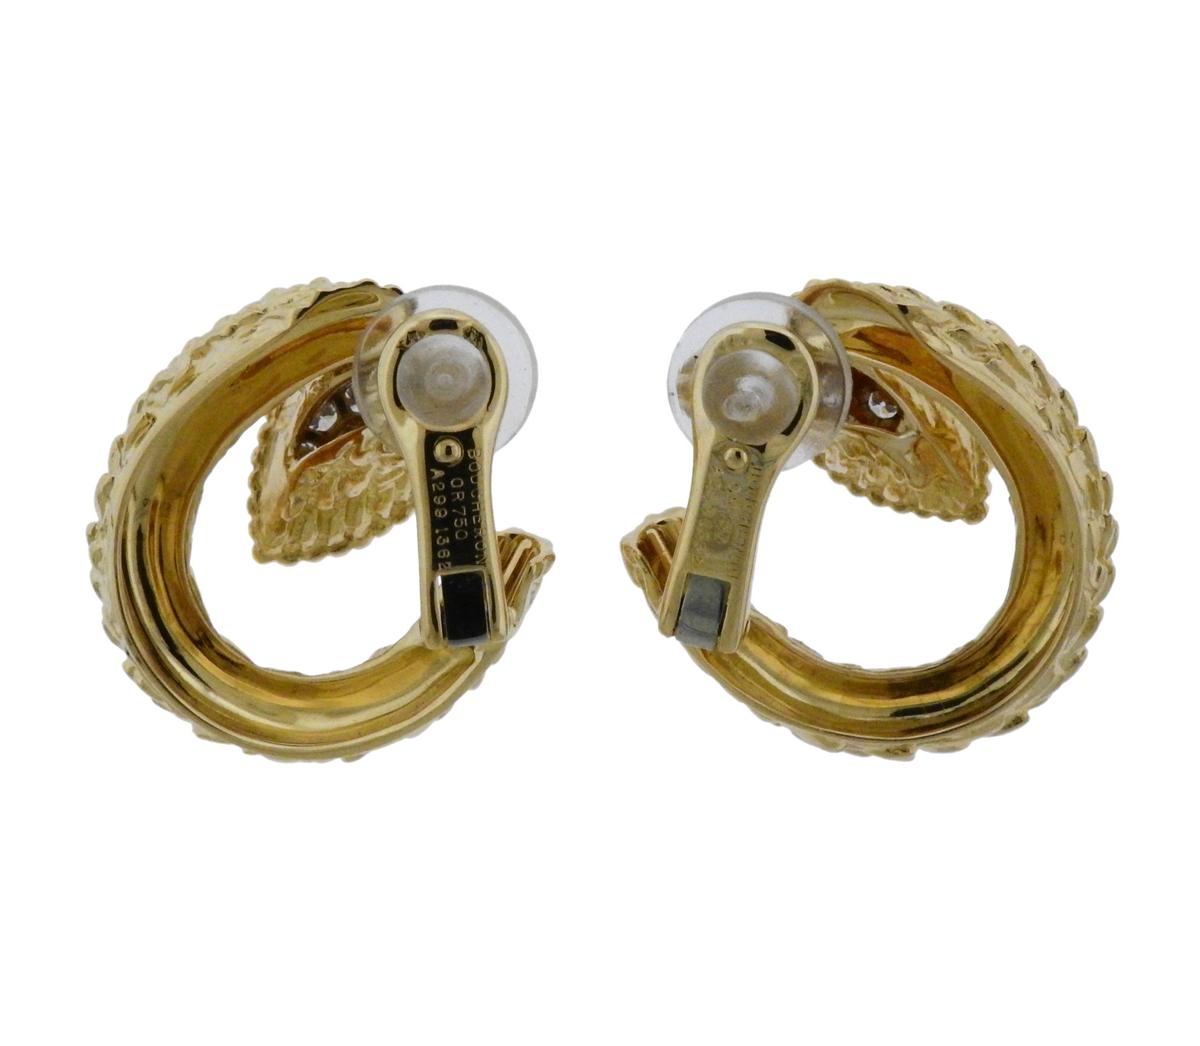 Pair of 18k yellow gold earrings, crafted by Boucheron for Serpent Boheme collection, adorned with approx. 0.50ctw in G/VS diamonds. Earrings are 24mm x 25mm, weigh 17.8 grams. Marked:  Boucheron, or750, serial number.